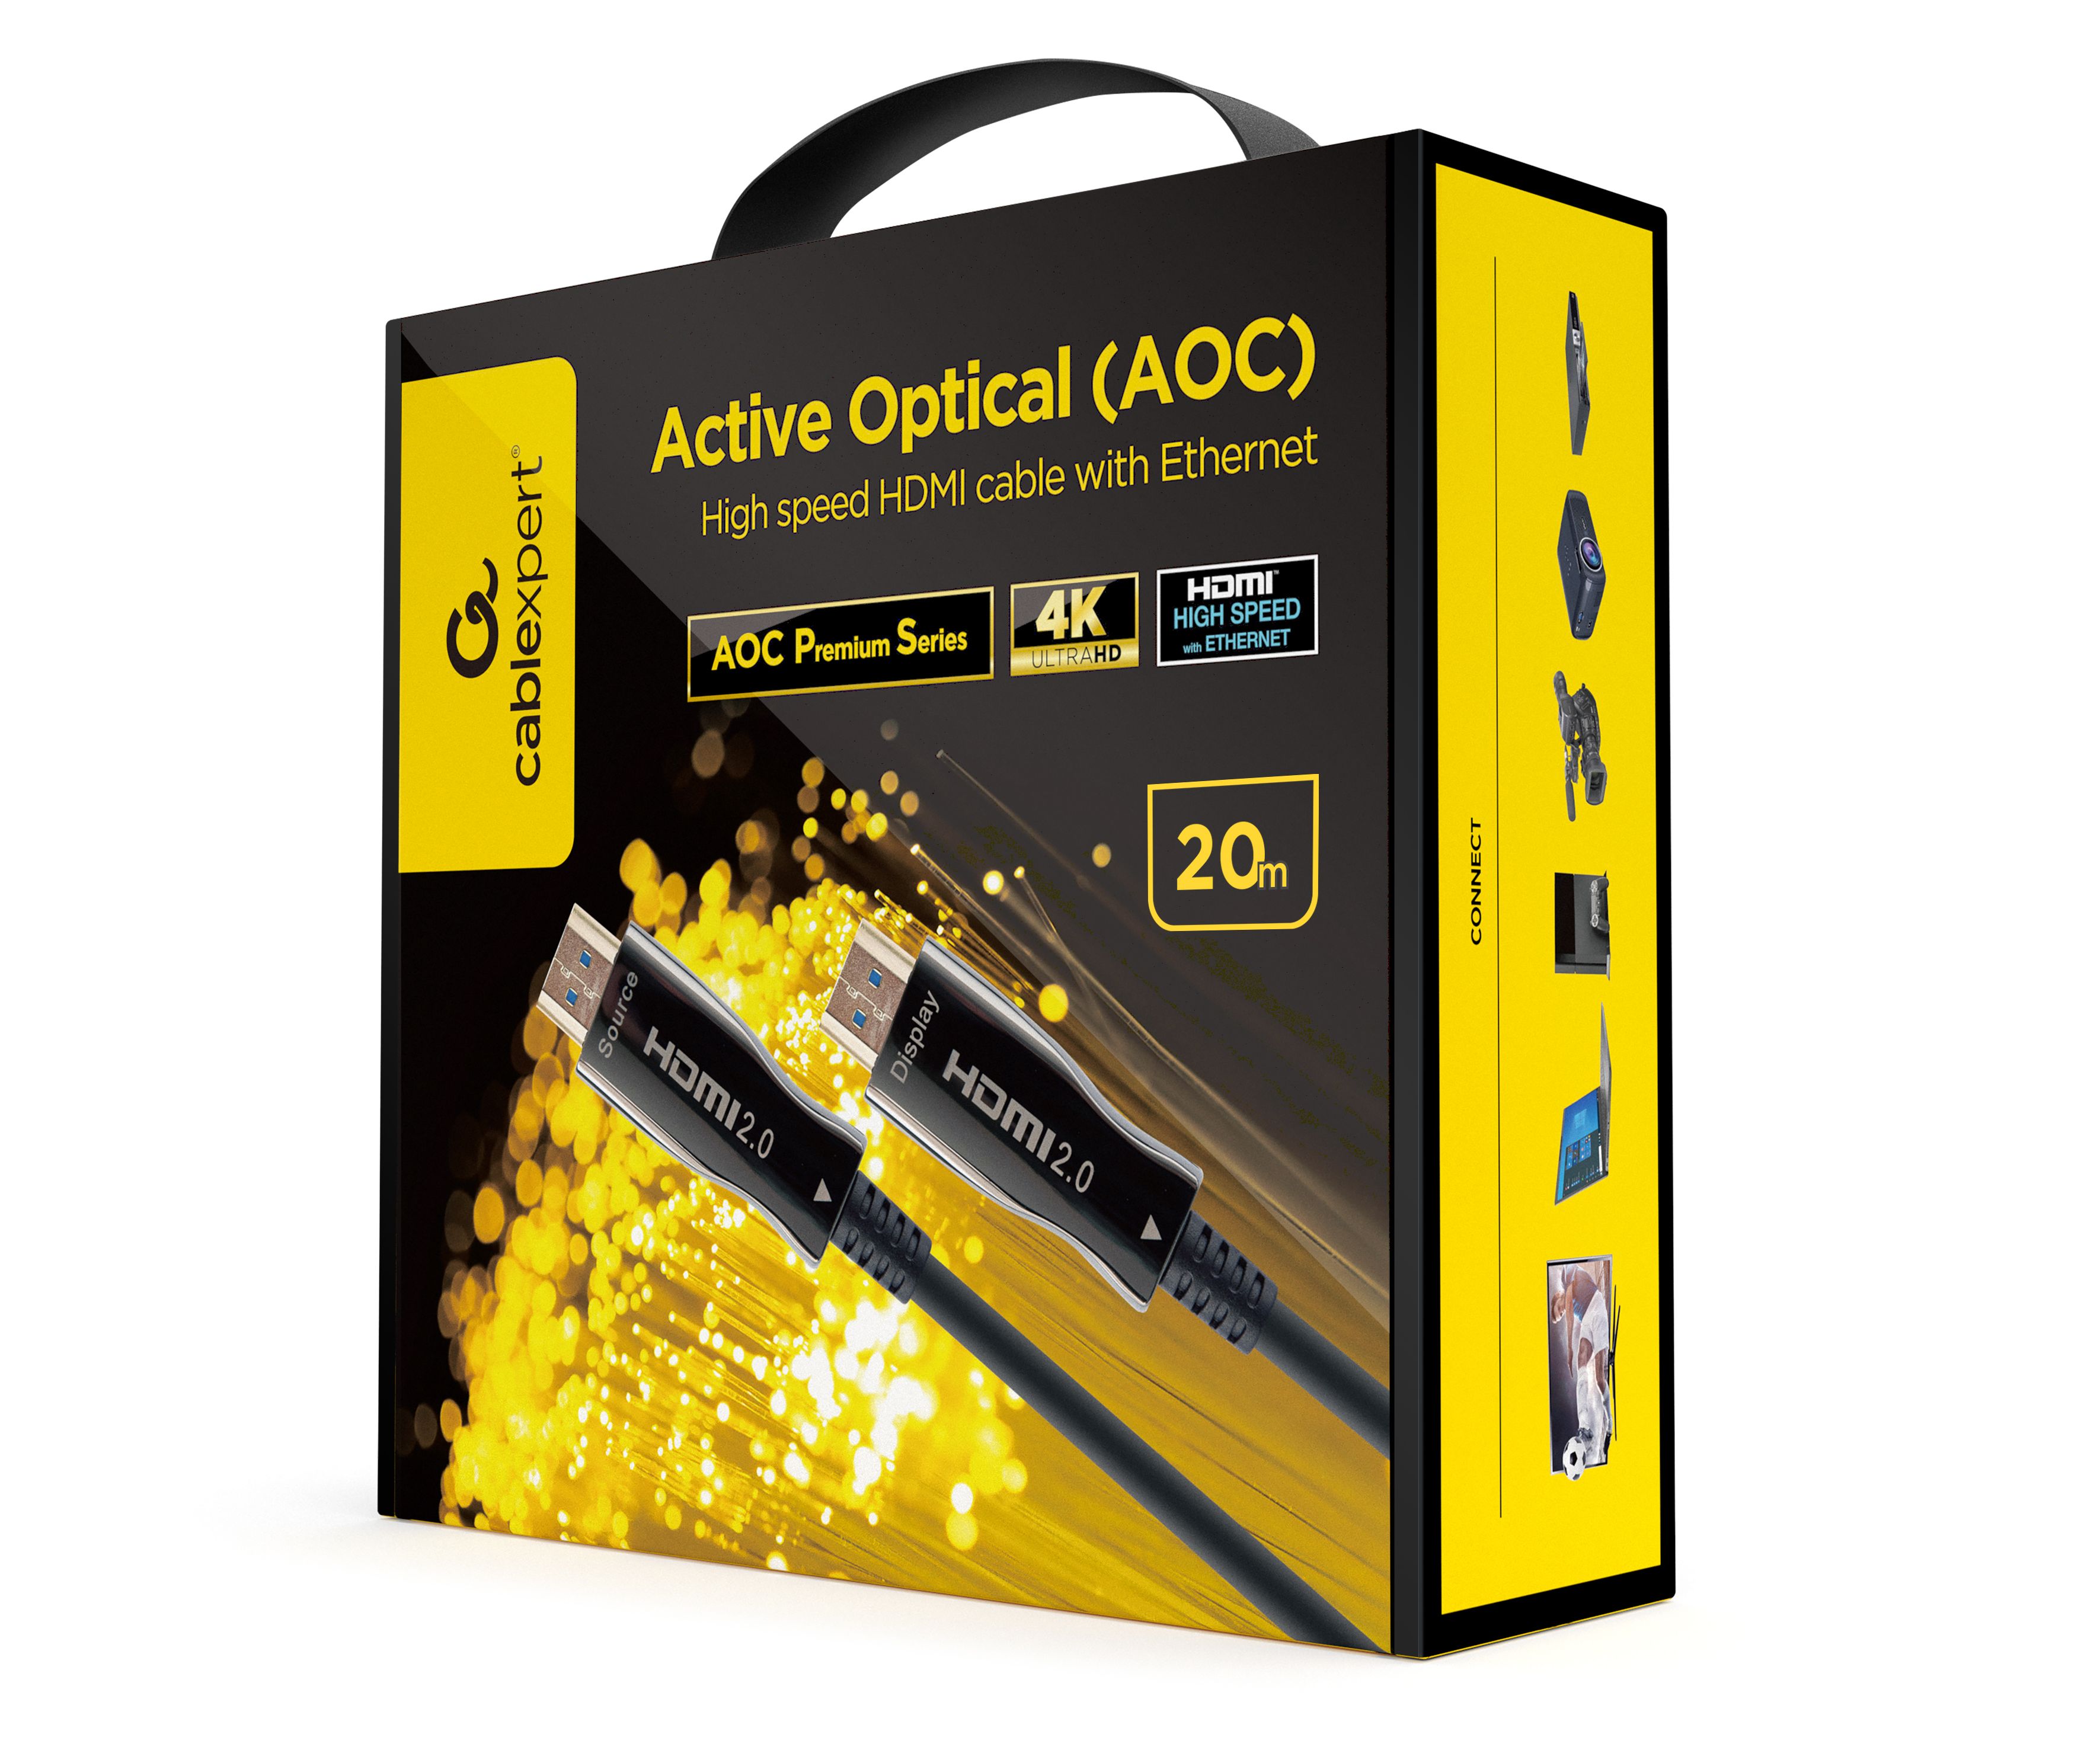 GEMBIRD Active Optical AOC High speed HDMI cable with Ethernet AOC Premium Series 20m_1